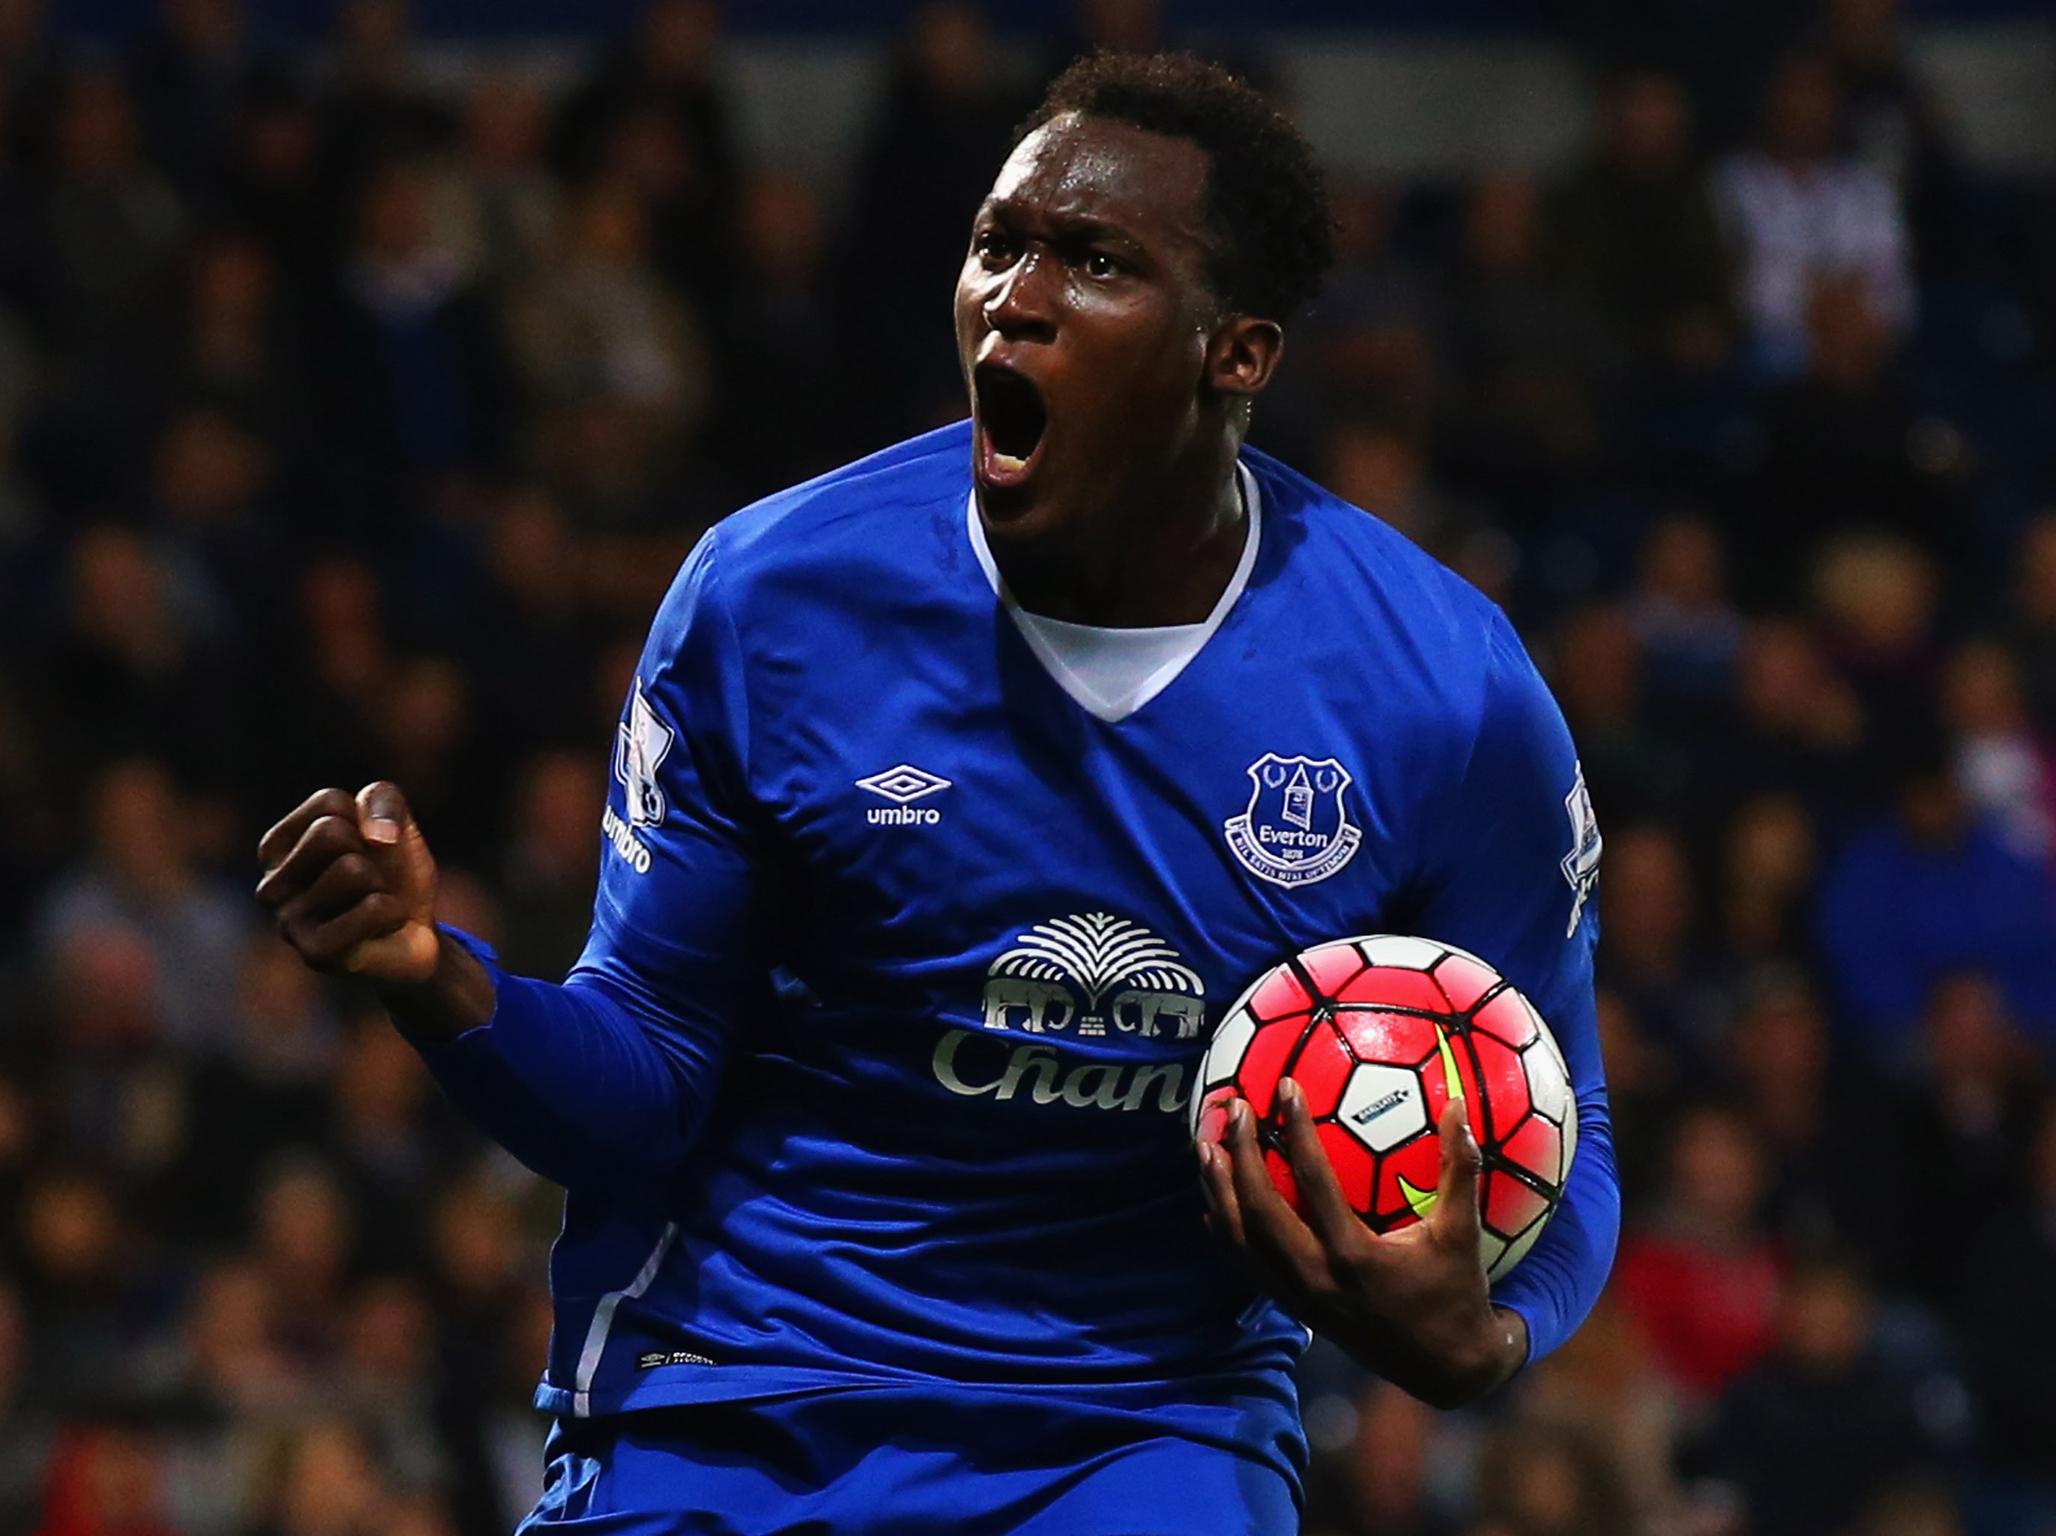 &#13;
Everton are missing Lukaku's presence up front &#13;